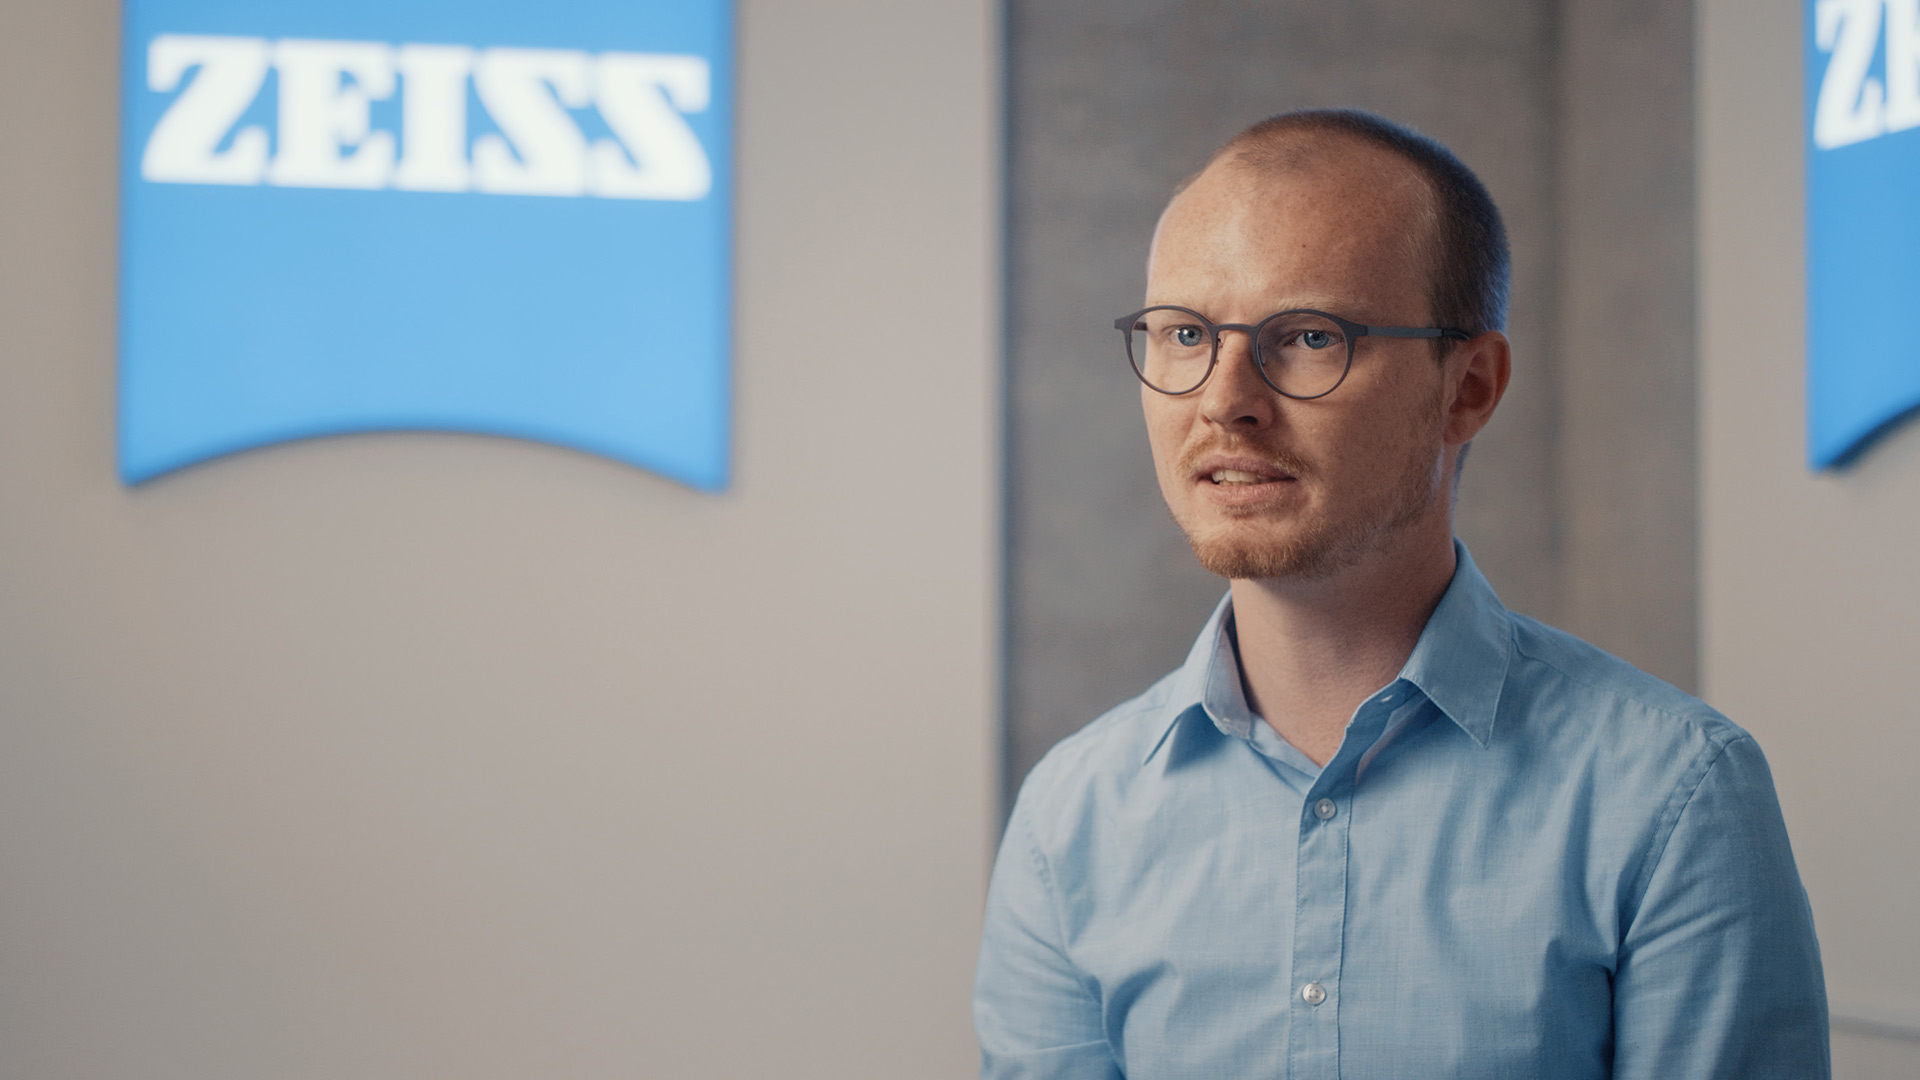 Interview with Dr. Alexander Leube, Optometrist and Visual Scientist at the ZEISS Vision Science Lab in Tübingen (Germany)